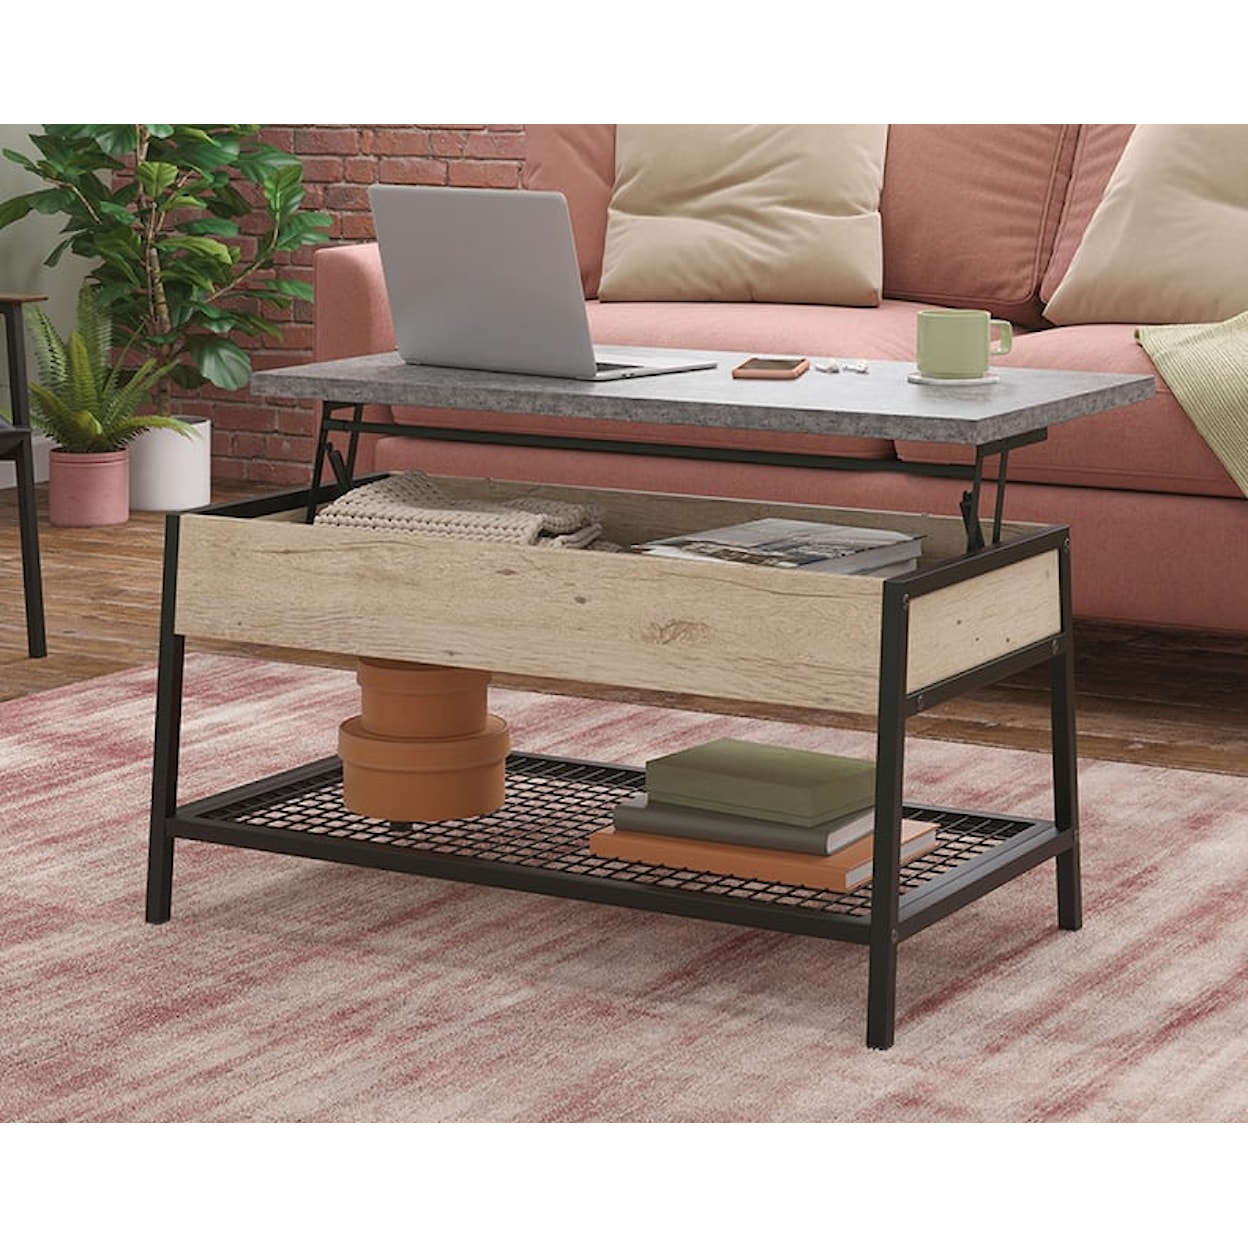 Sauder Market Commons Lift-Top Coffee Table